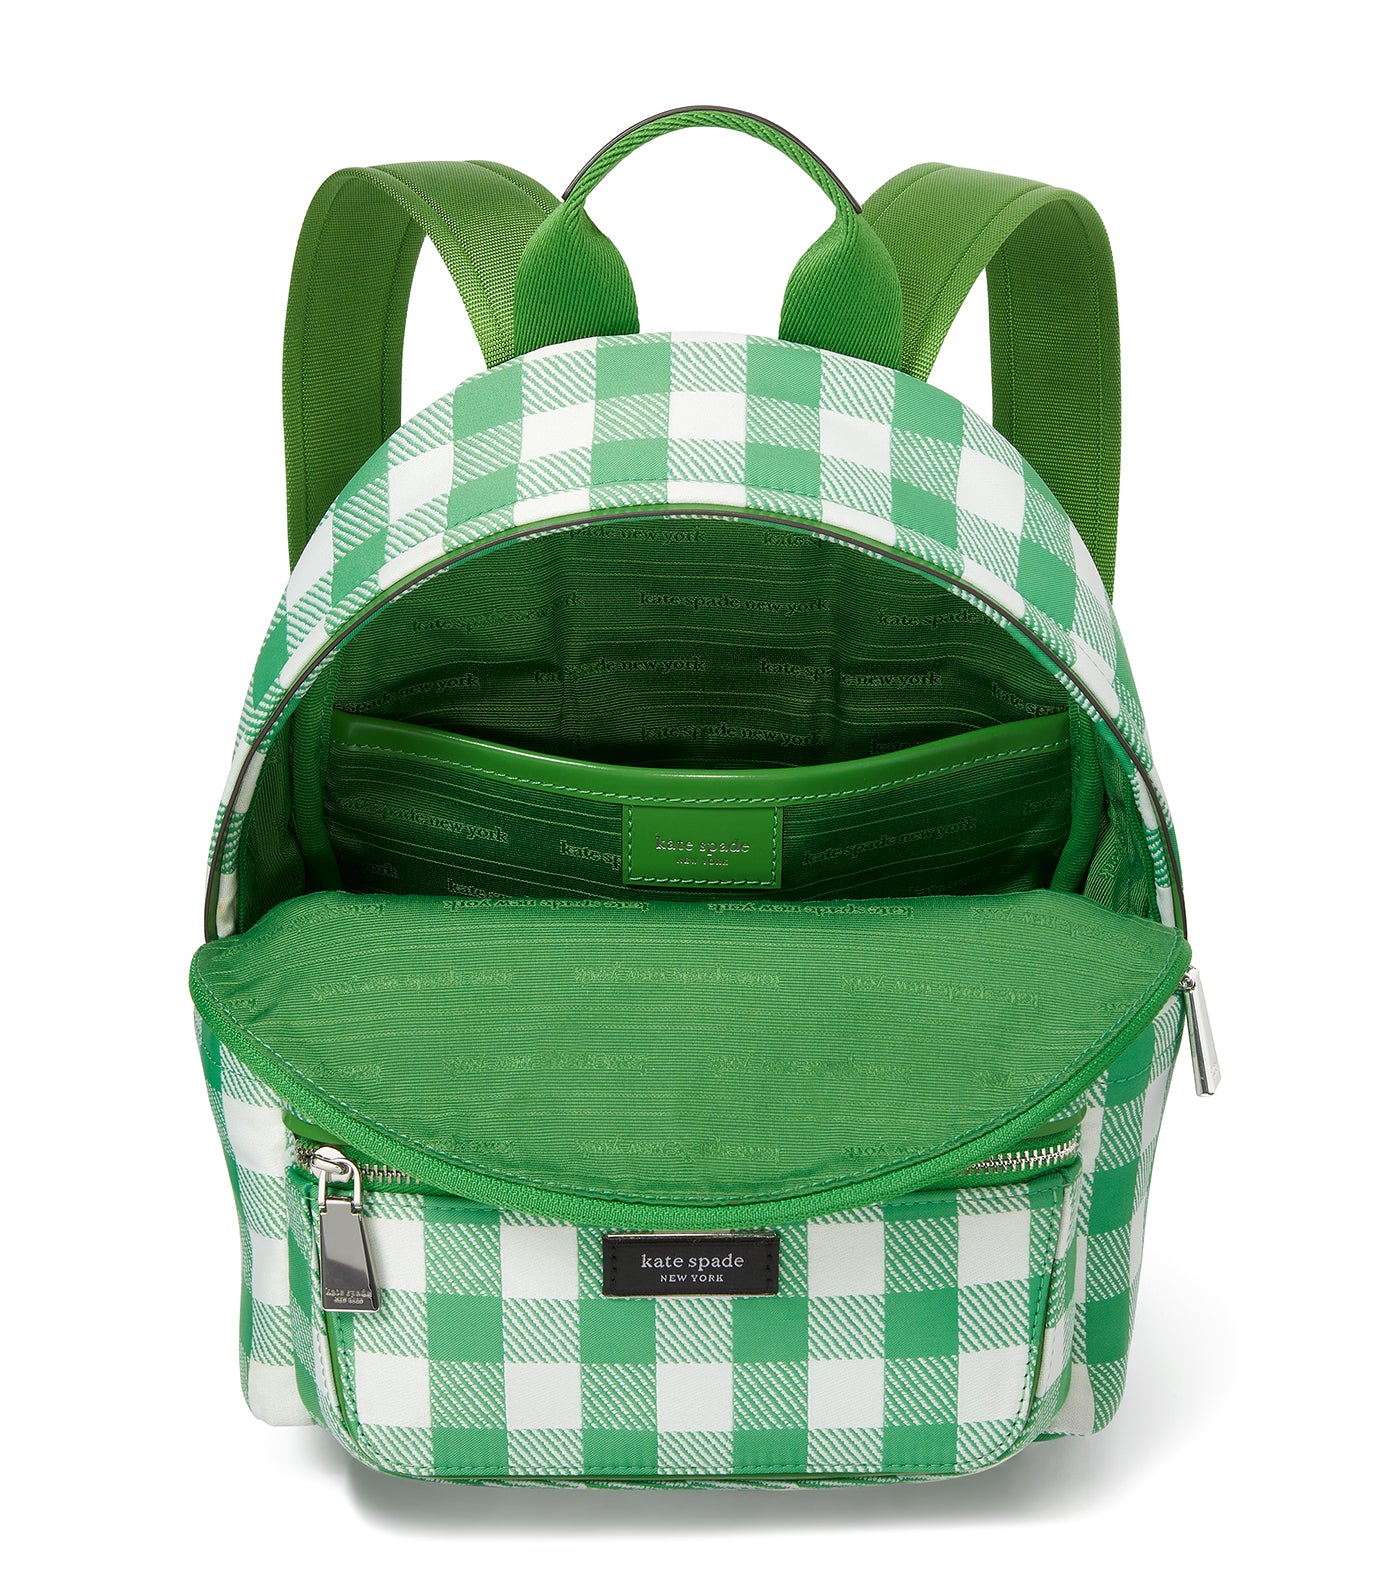 Sam Icon Gingham Printed Fabric Small Backpack Candy Grass Multi